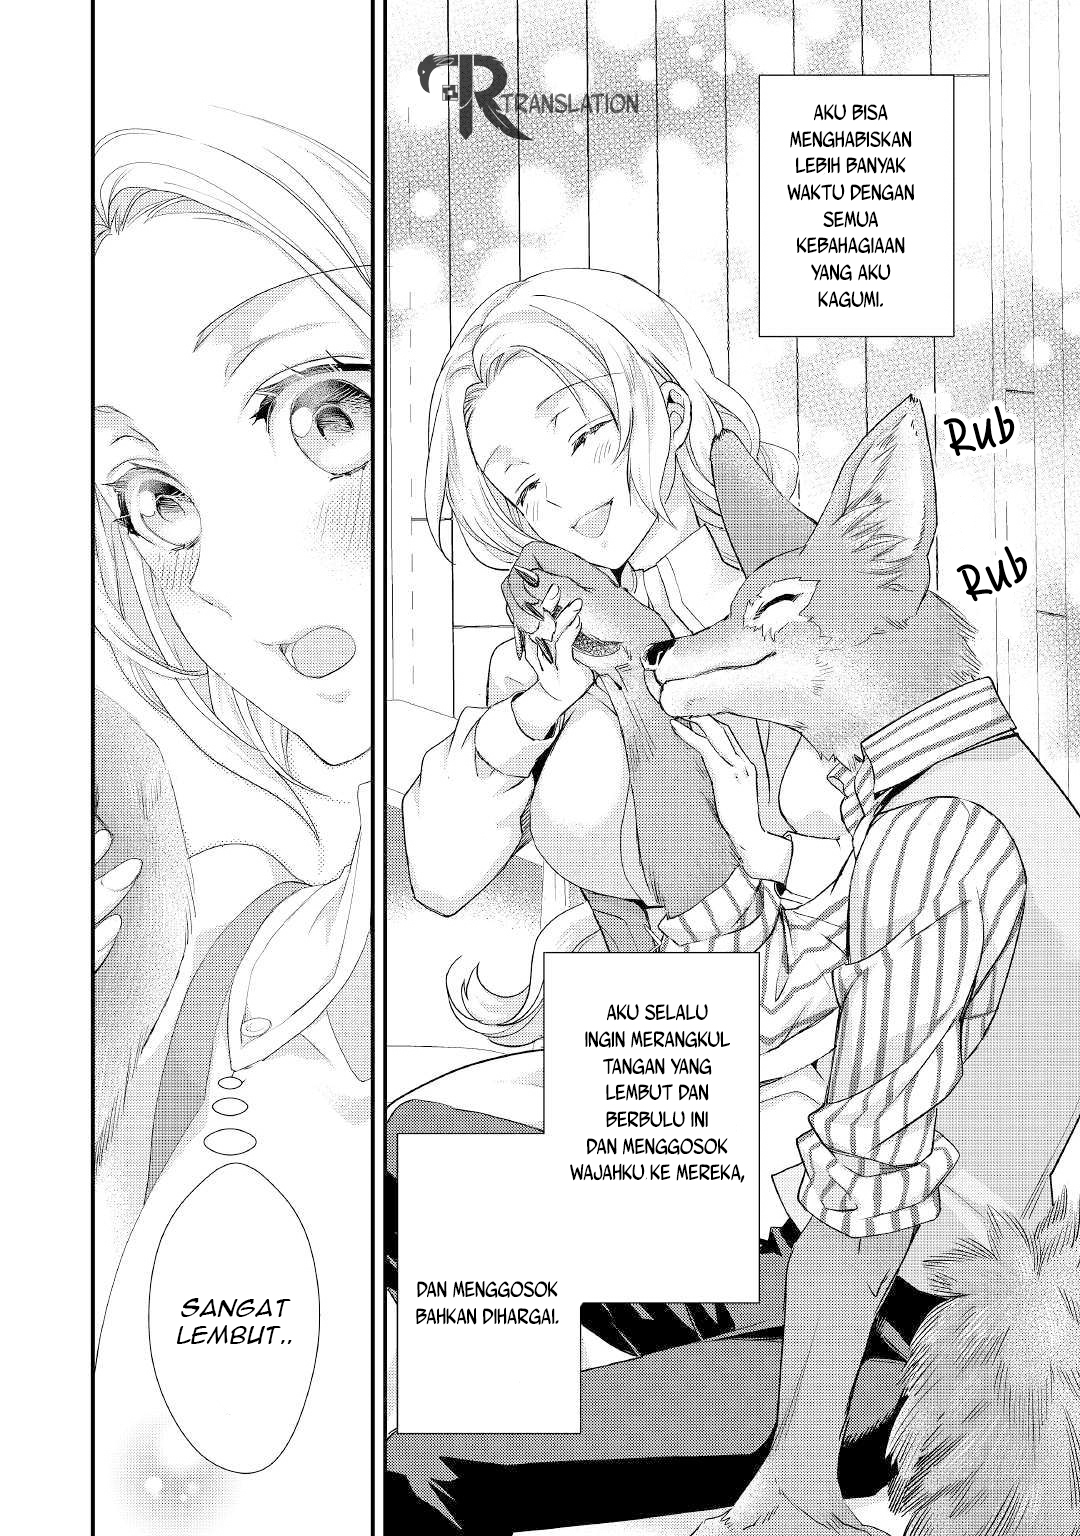 Milady Just Wants to Relax Chapter 010.1